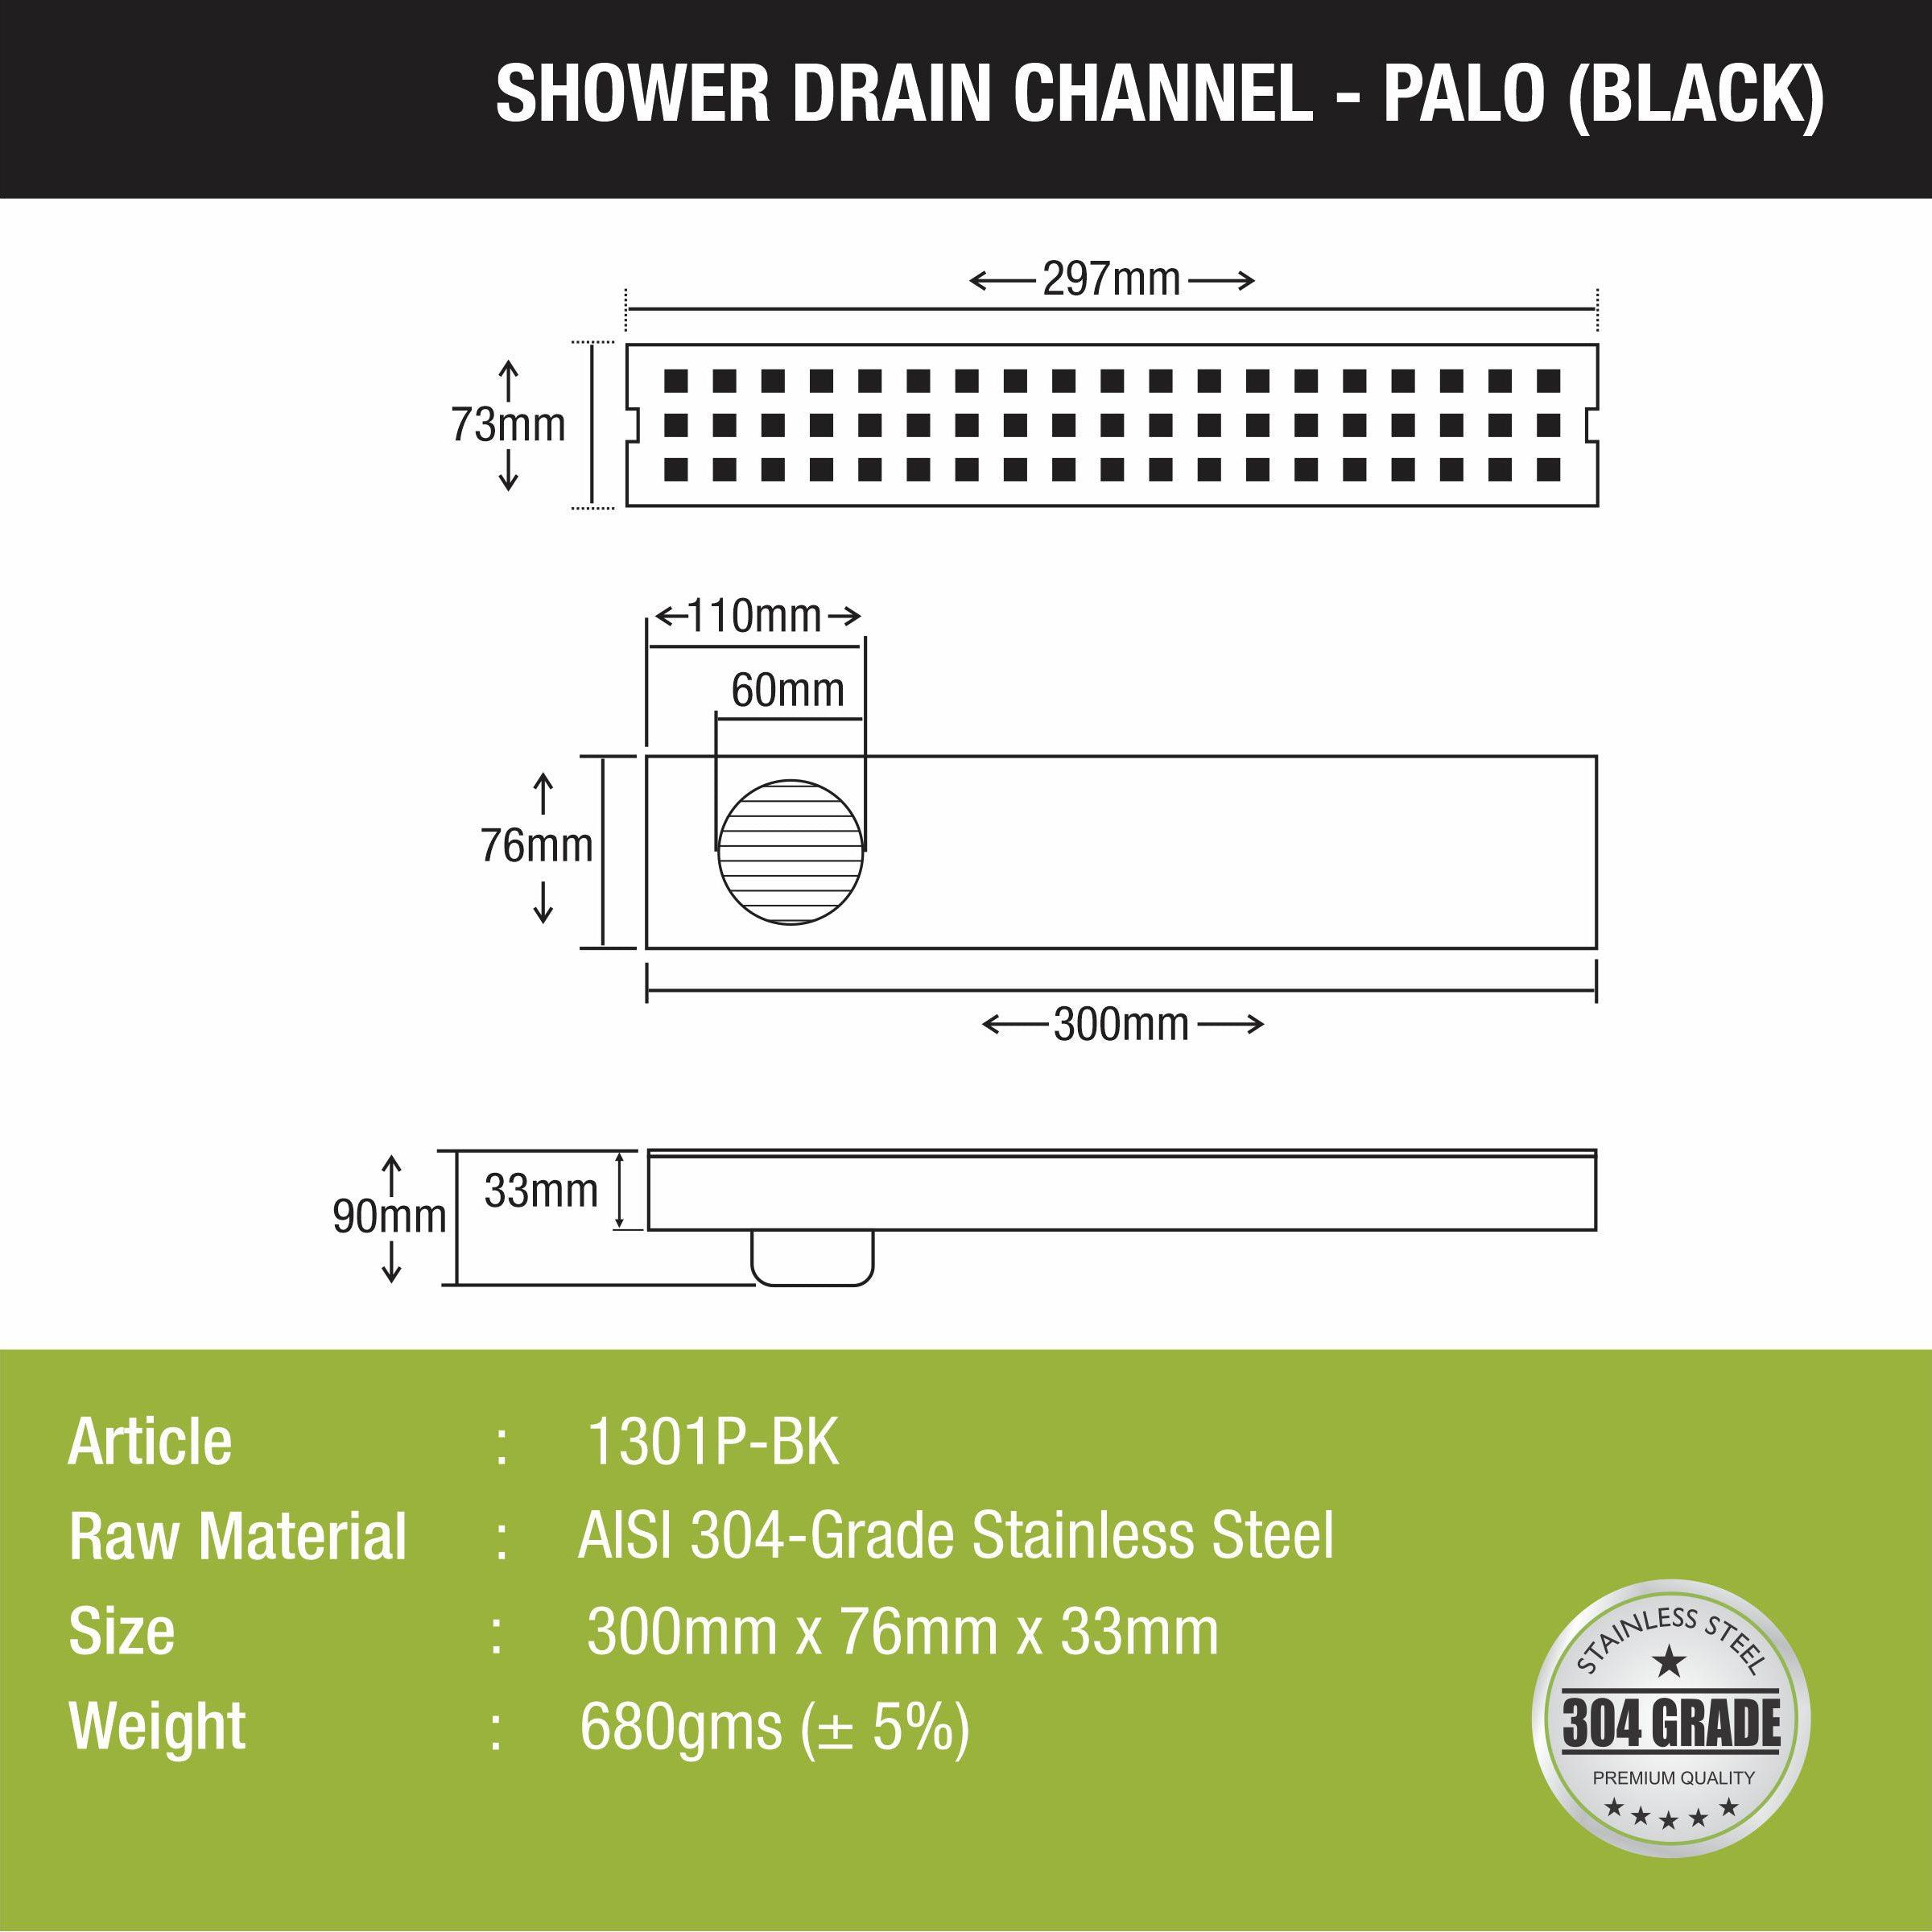 Palo Shower Drain Channel - Black (12 x 2 Inches) size and  measurement